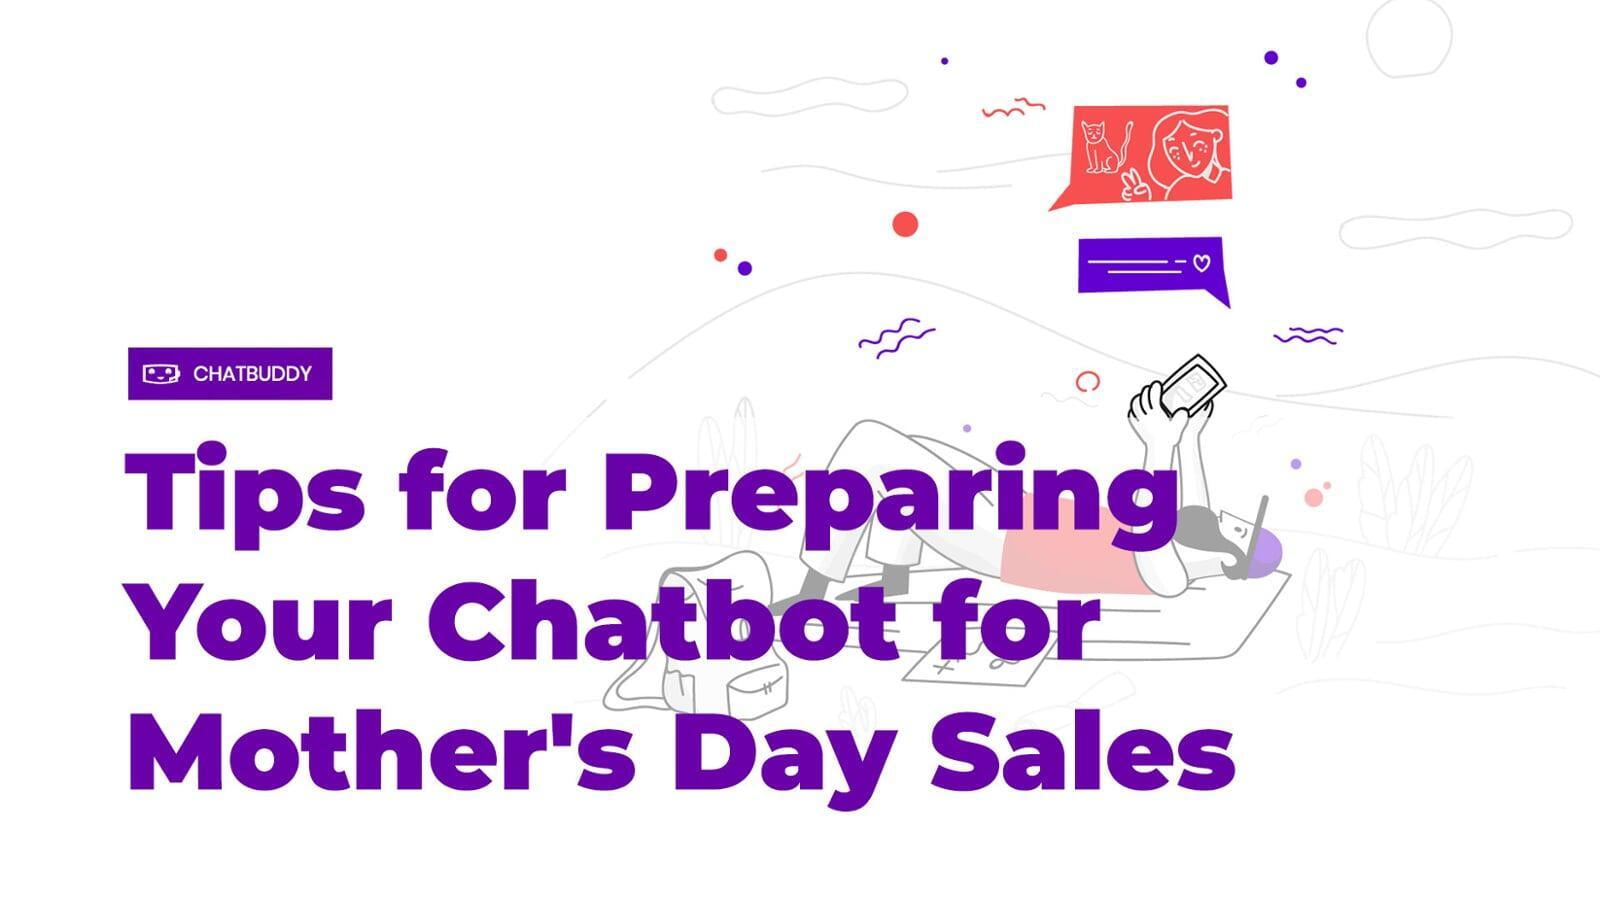 Tips for Preparing Your Chatbot for Mother's Day Sales